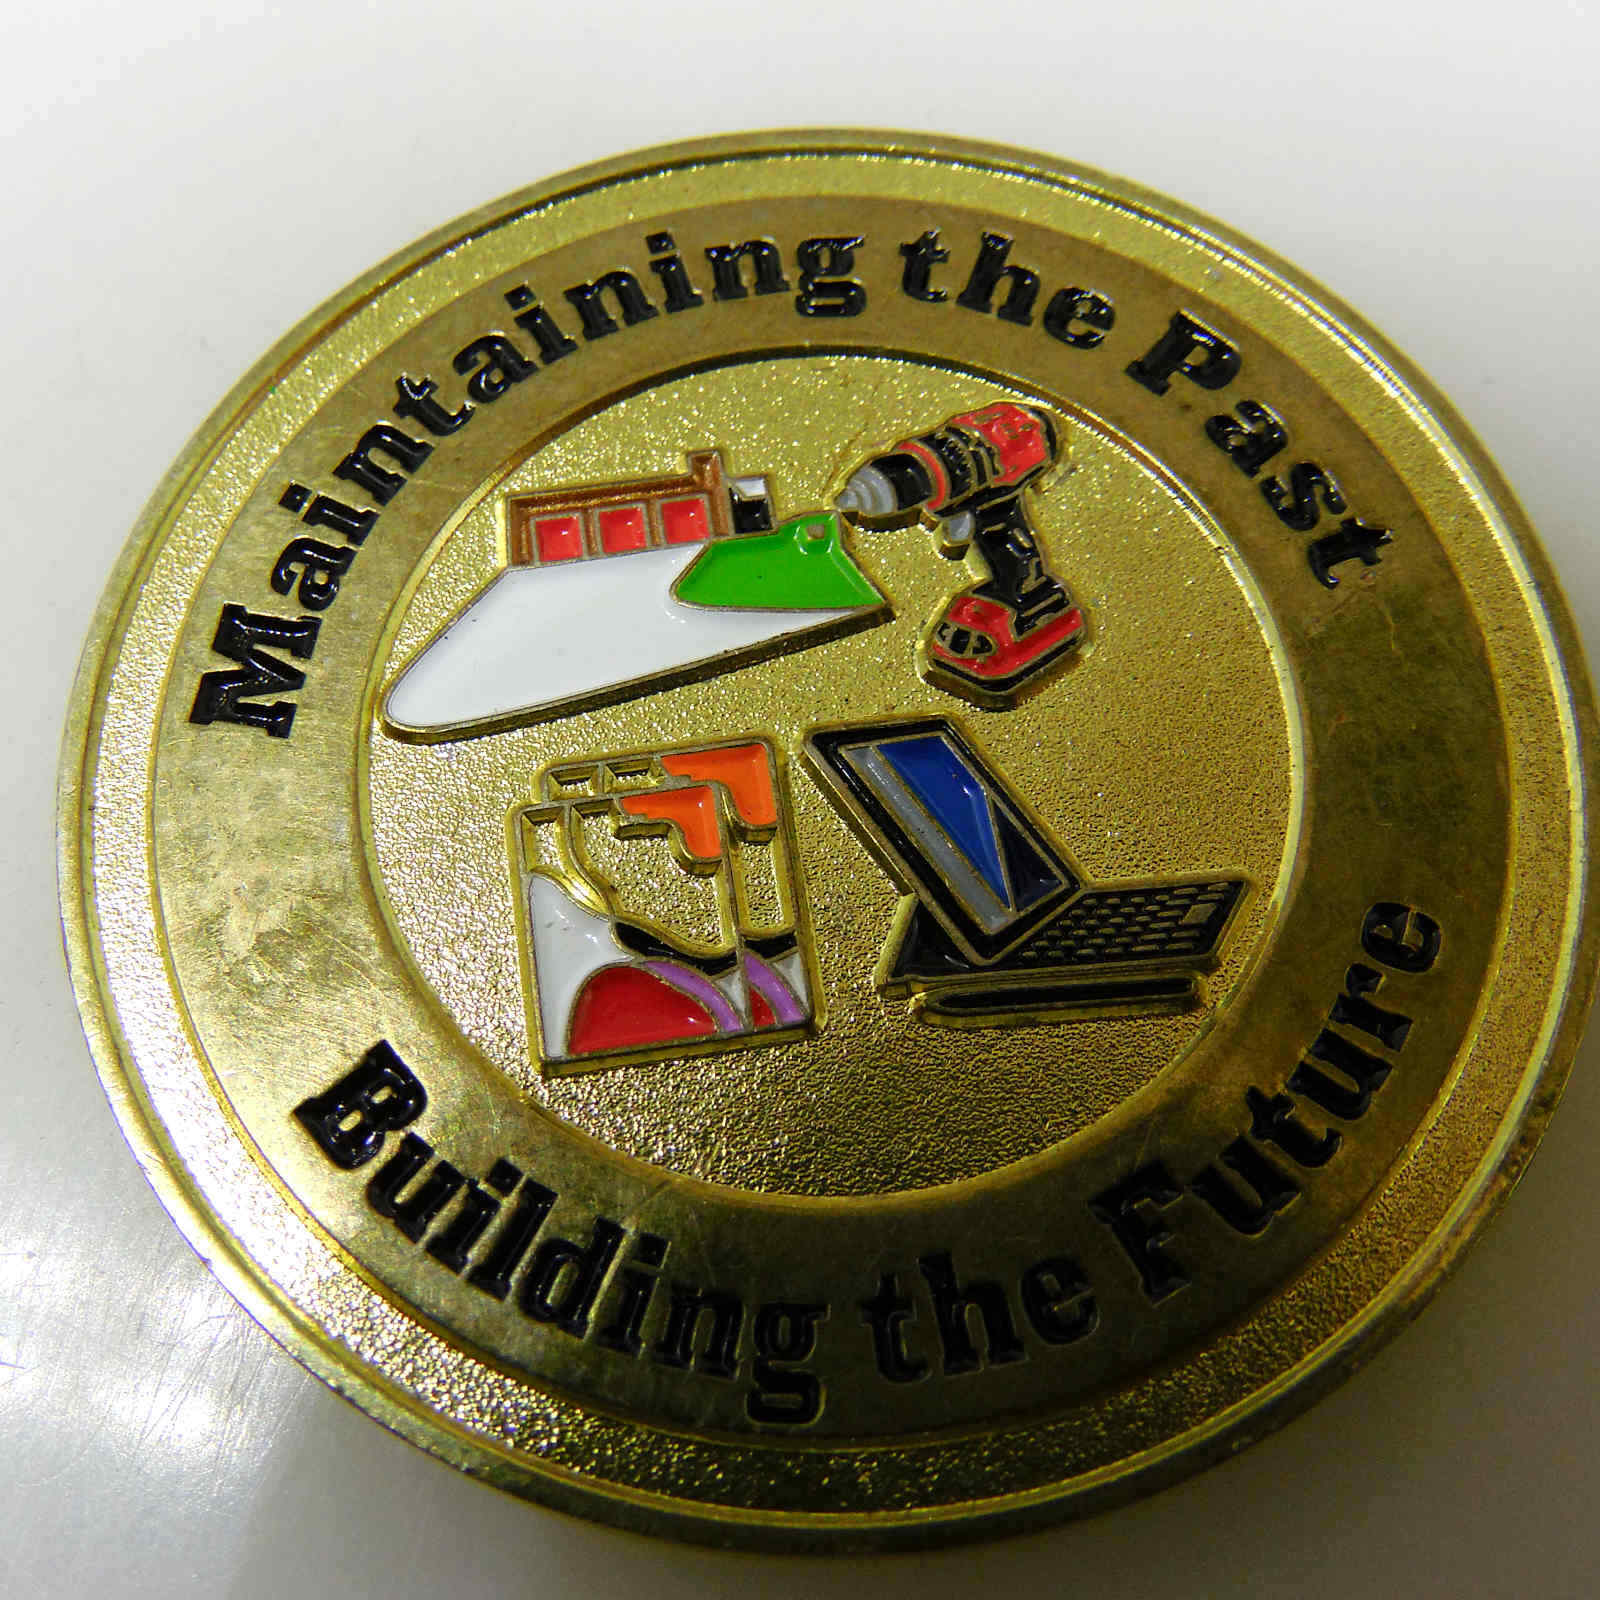 ANCHORAGE MIDDLETOWN FACILITIES TECHNOLOGY DIVISION CHALLENGE COIN